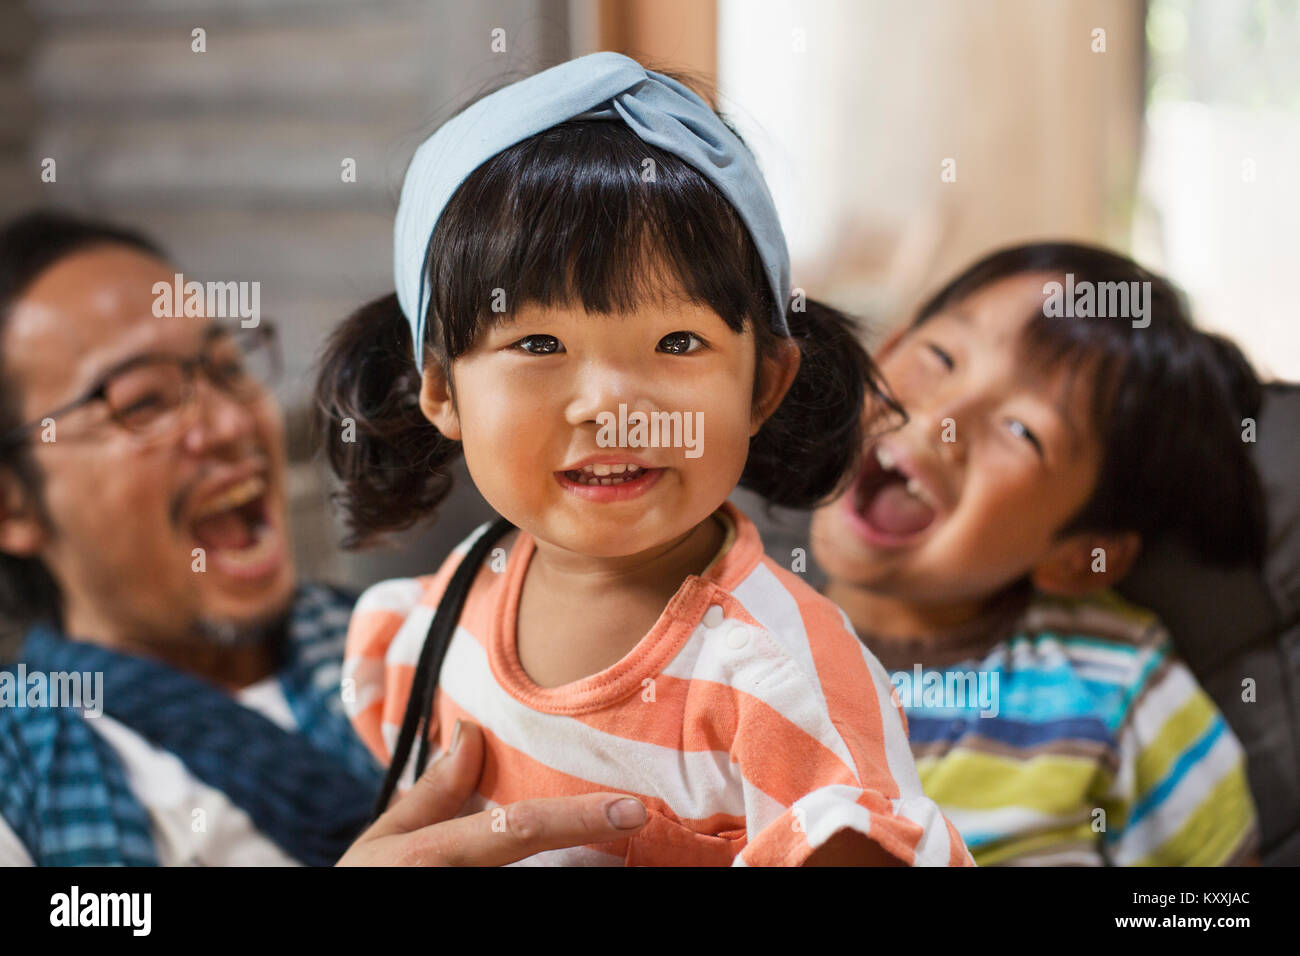 Man, boy and young girl with black pigtails wearing blue hairband sitting on a grey sofa, laughing. Stock Photo